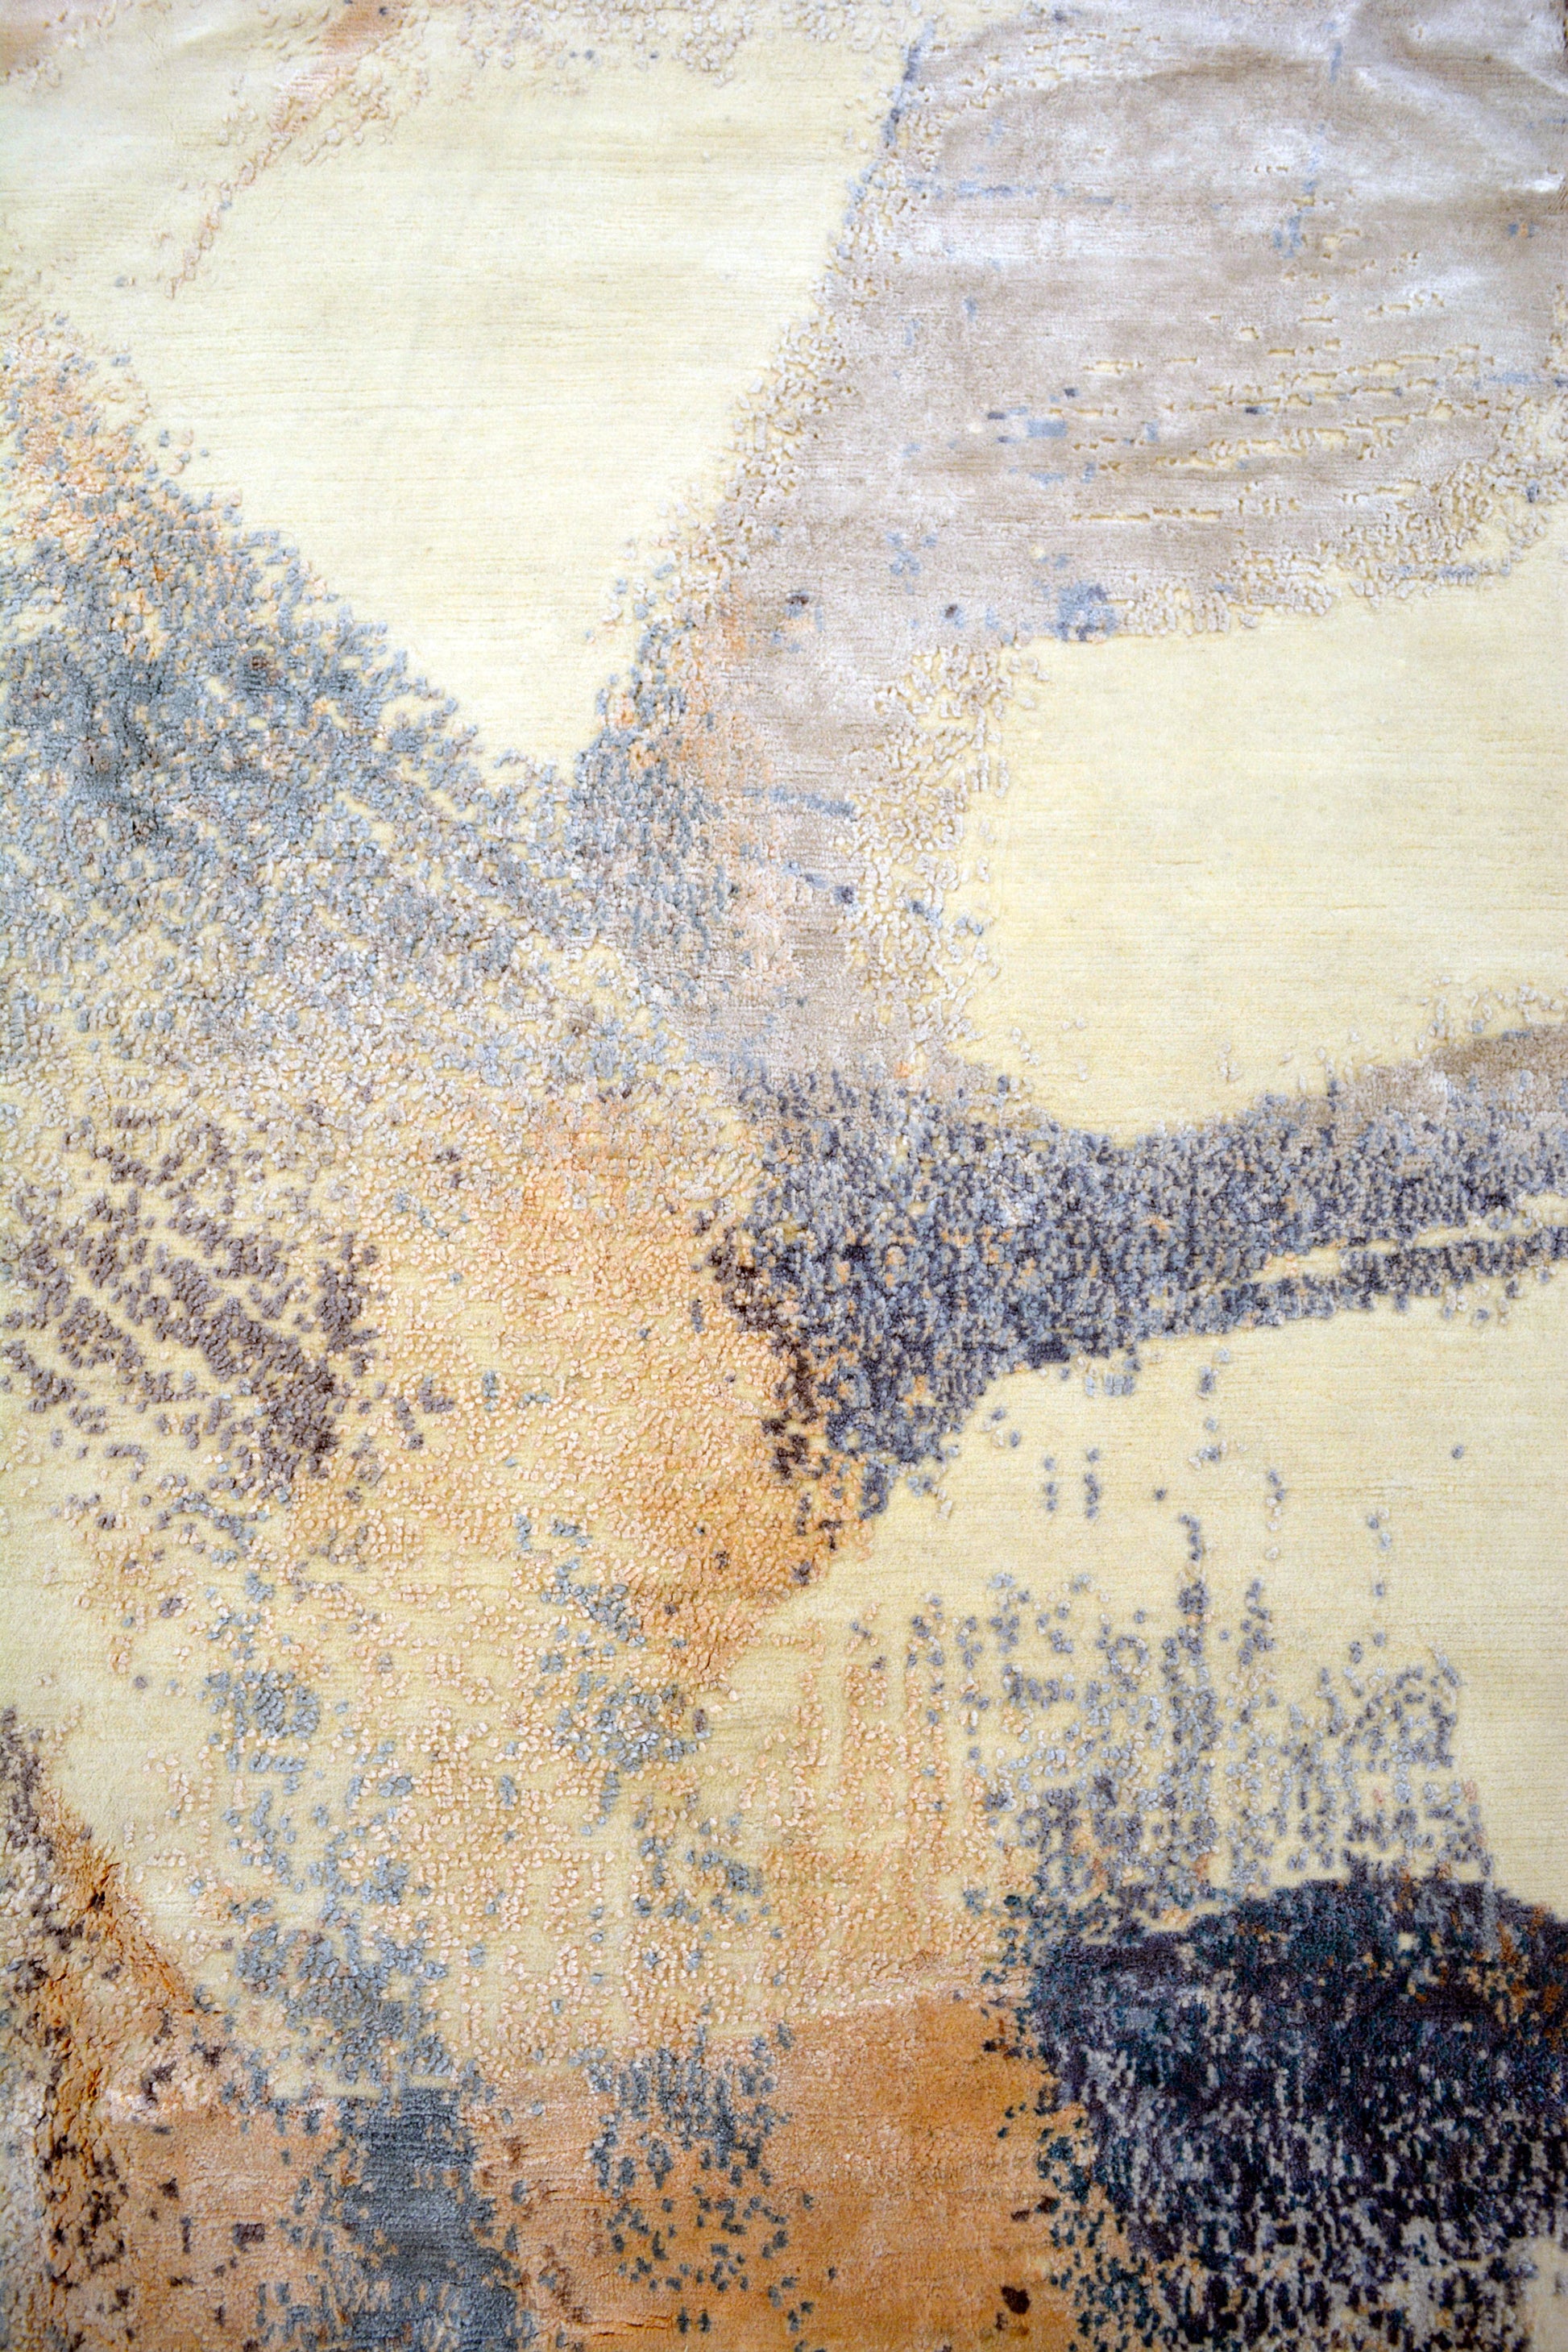 The center's close-up renders the brush strokes in different colors and chaotically.